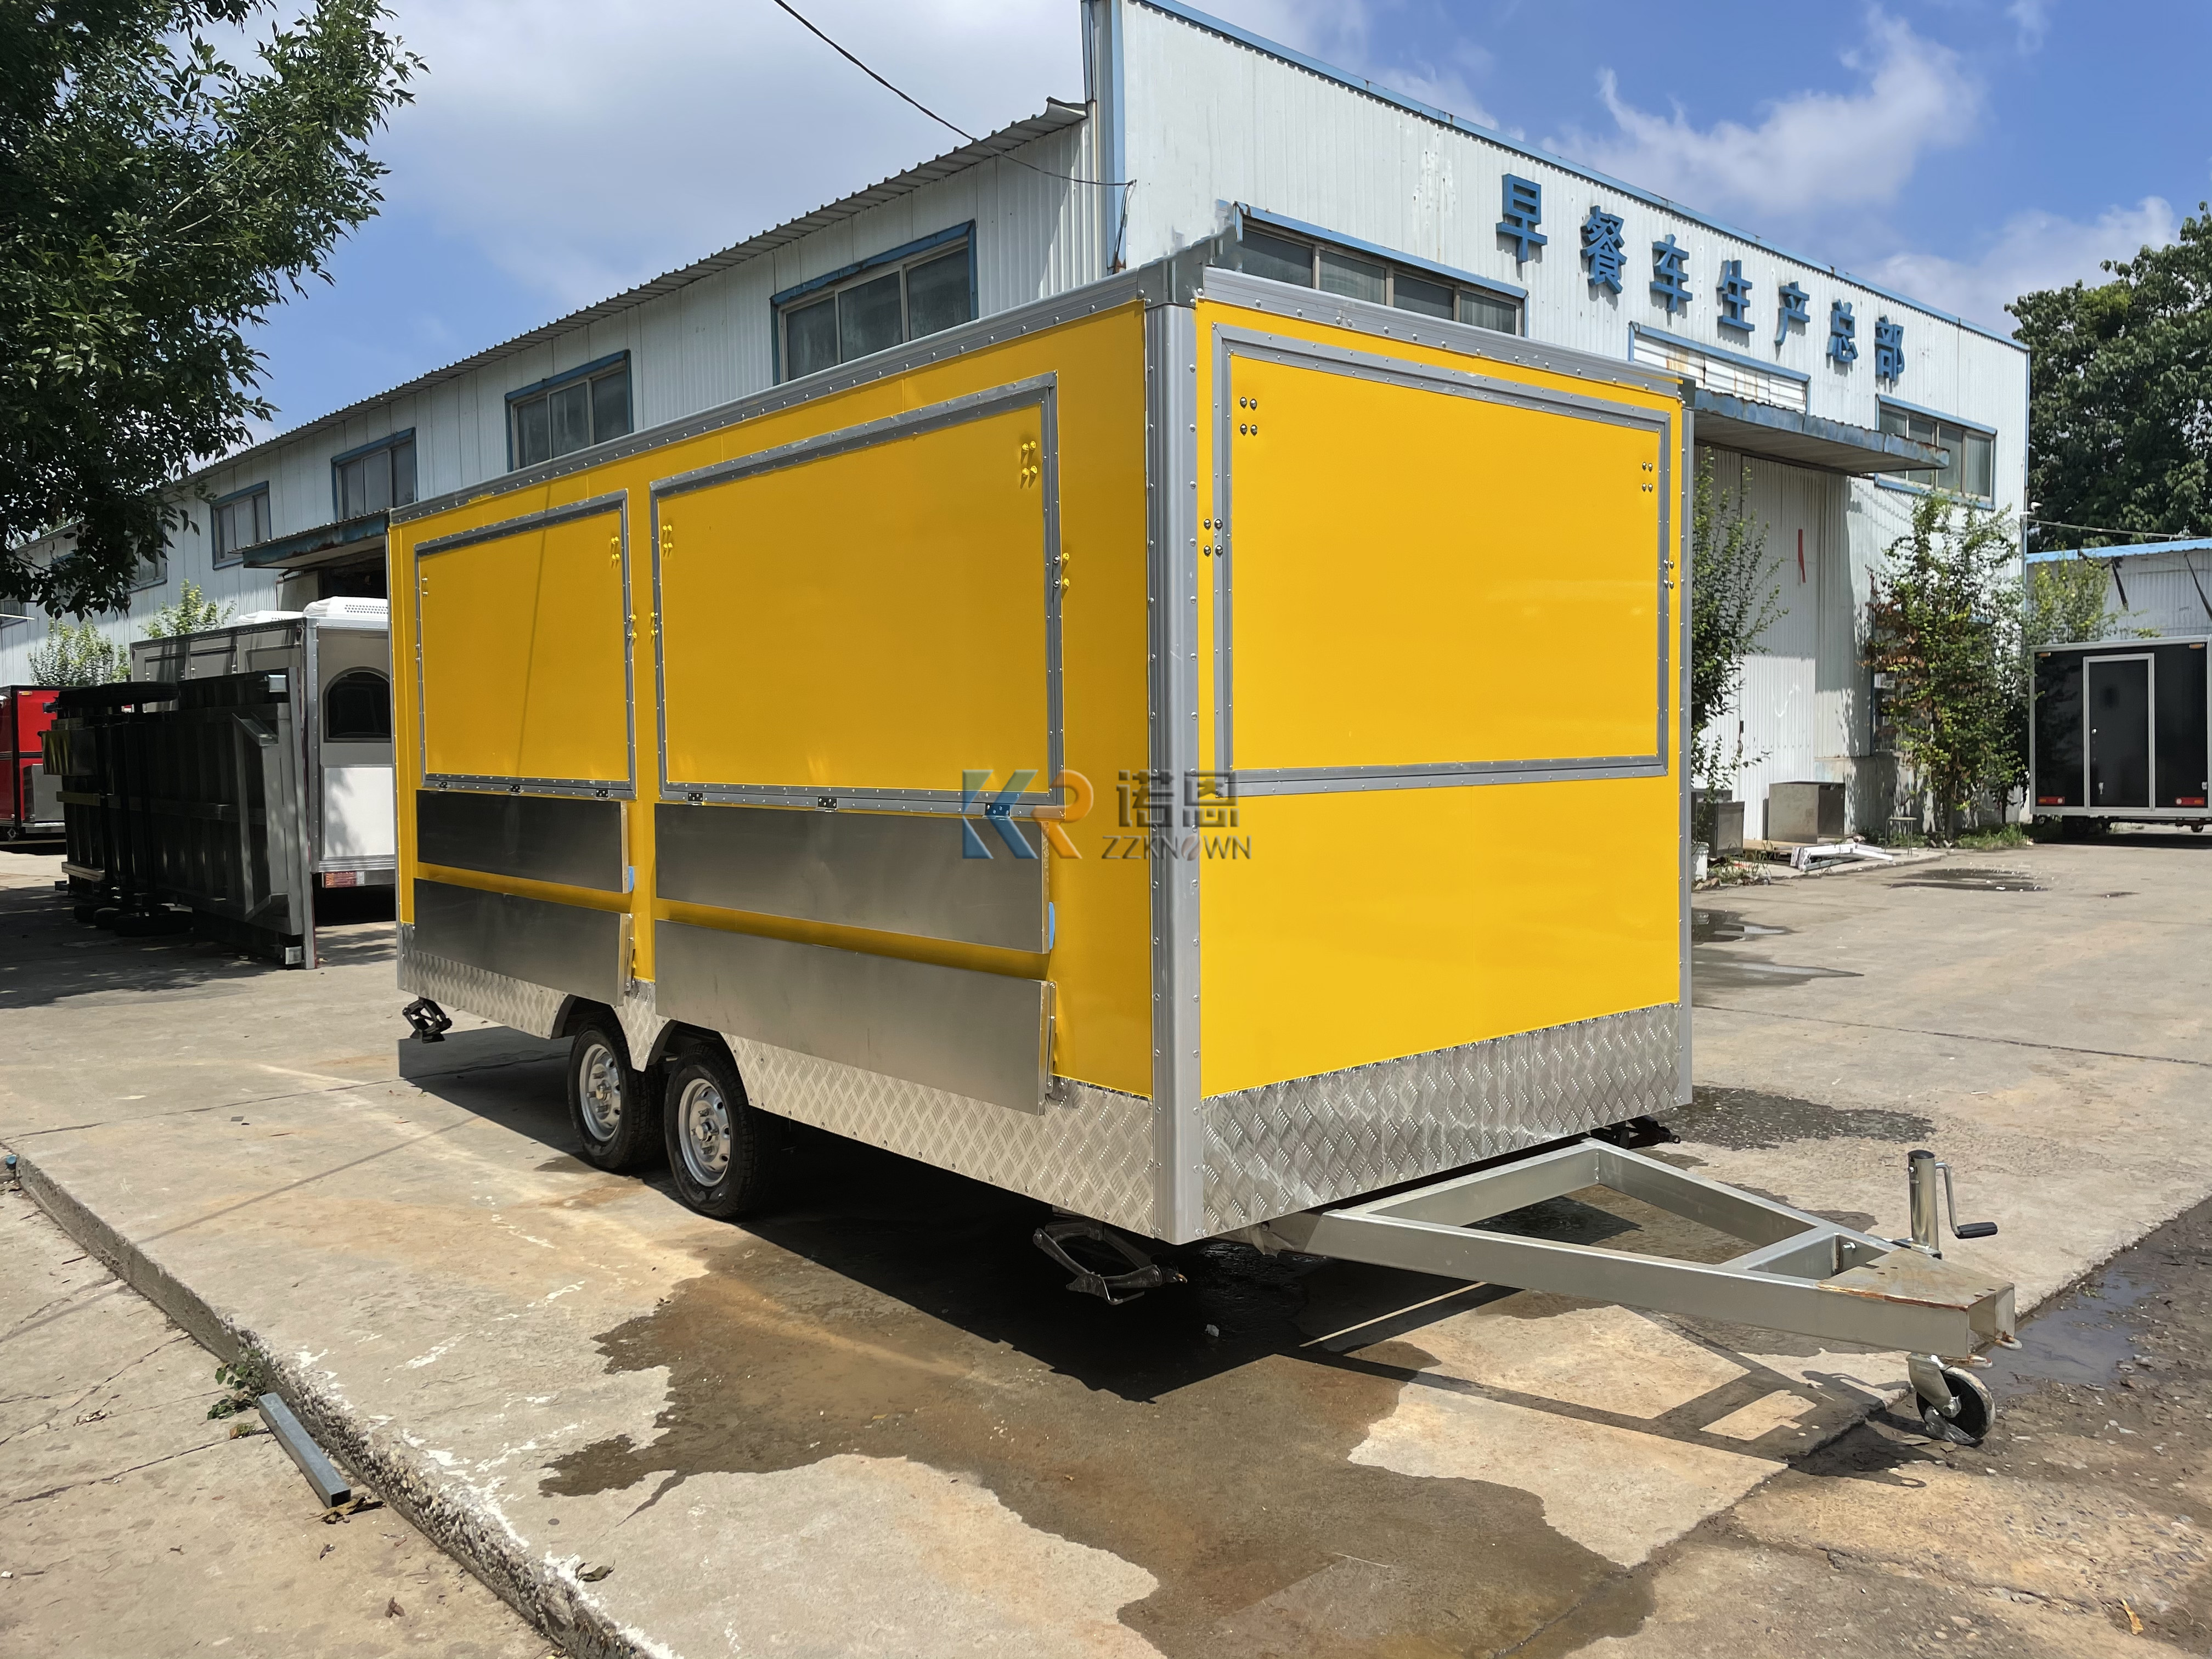 KN-FS480 New Arrival Outdoor Kitchen Fast Food Truck With Cooking Equipment China Factory Mobile Food Truck For Sale Europe